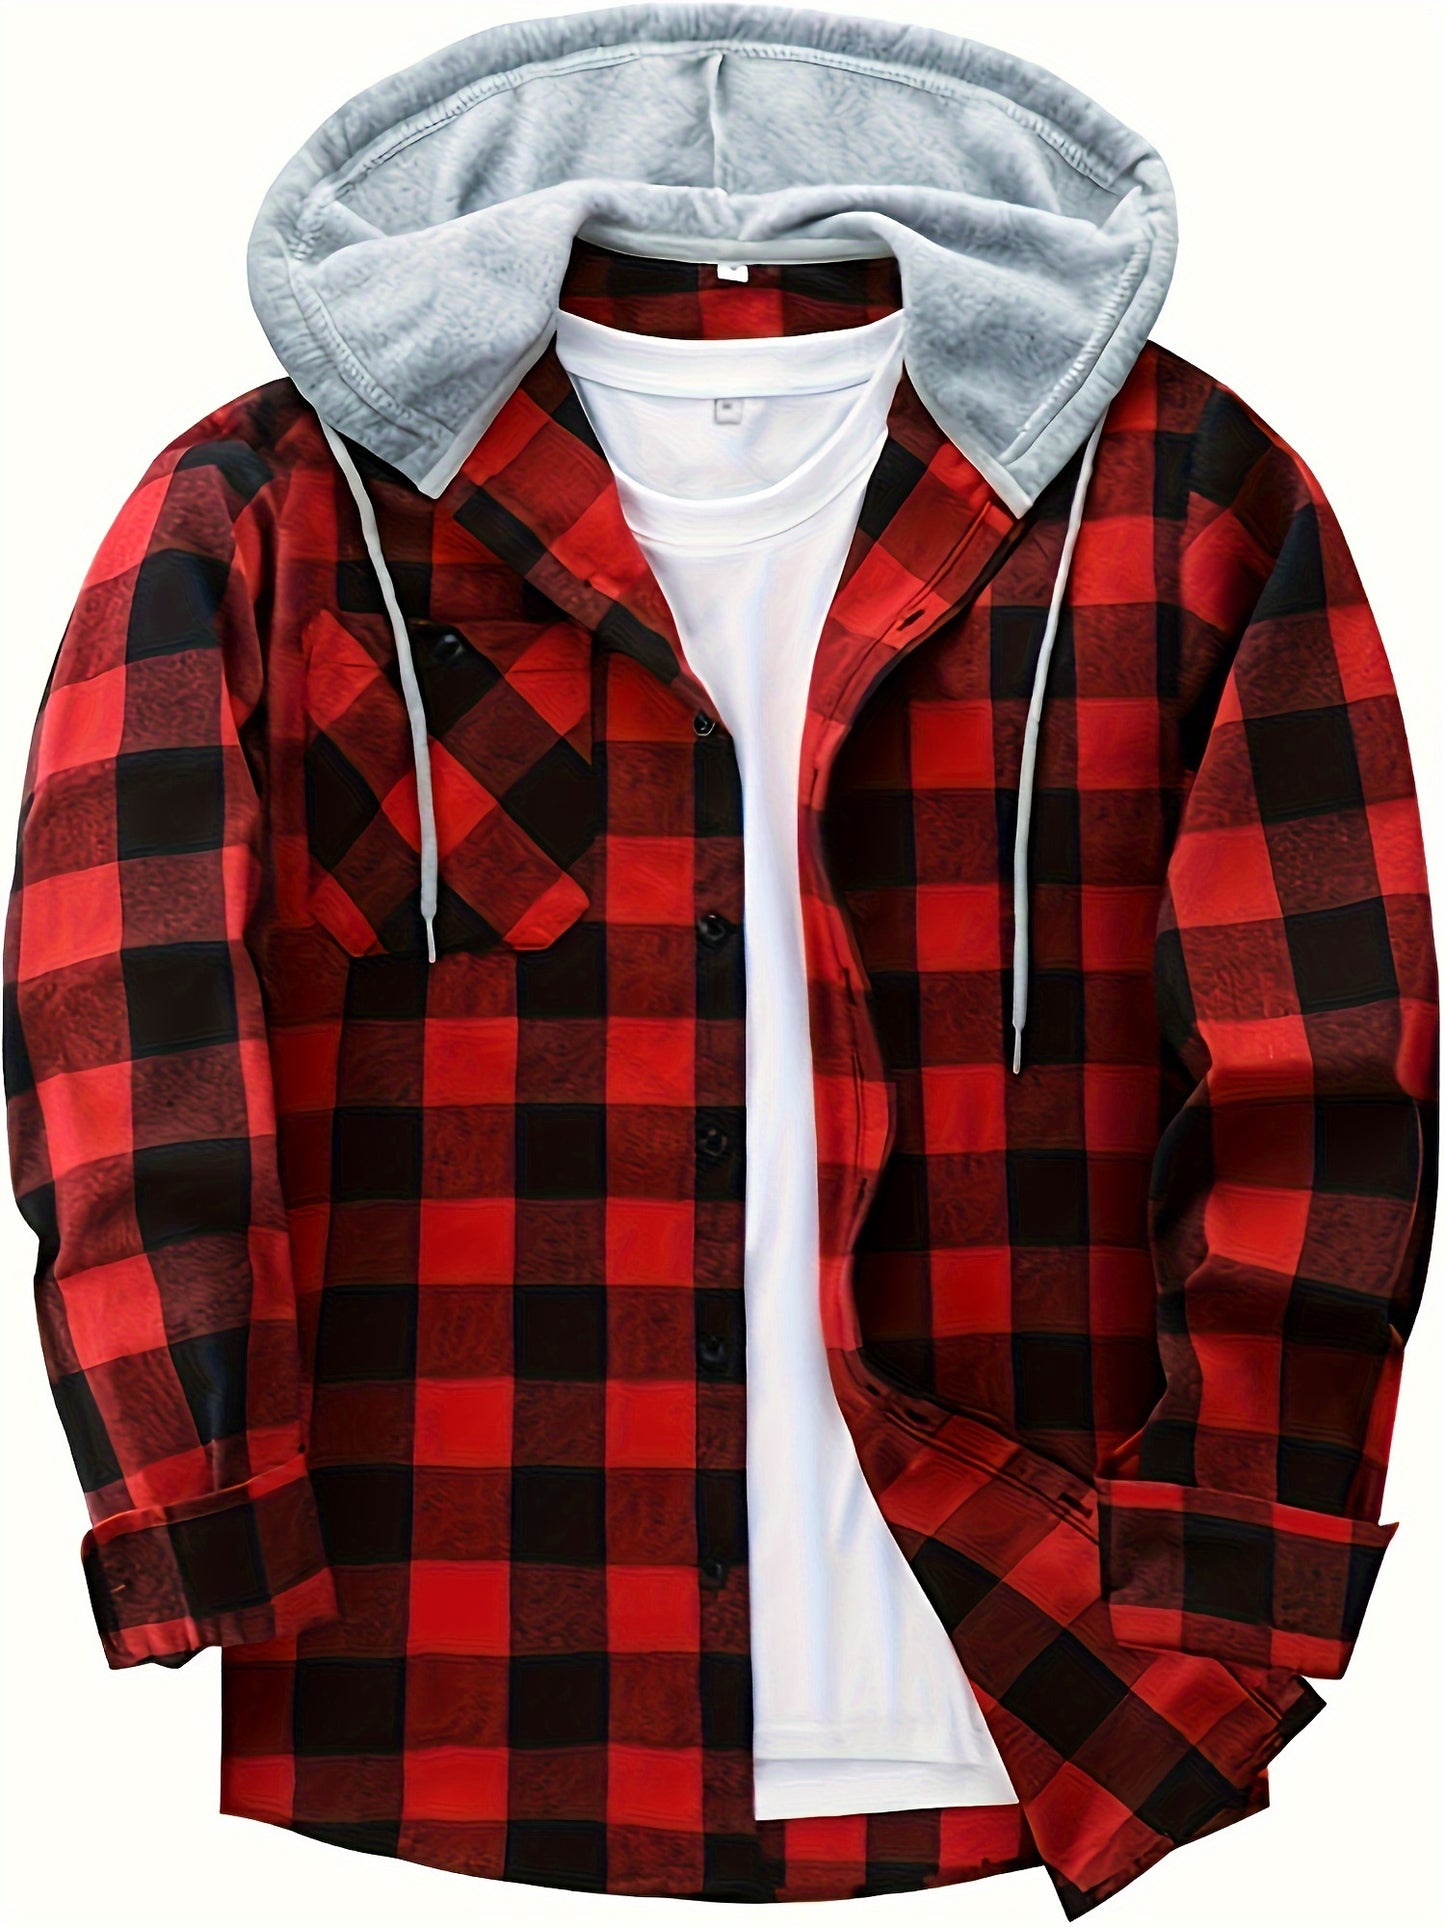 Plaid Pattern Men's Long Sleeve Hooded Shirt With Chest Pocket & Drawstring, Men's Casual Spring Fall Clothing